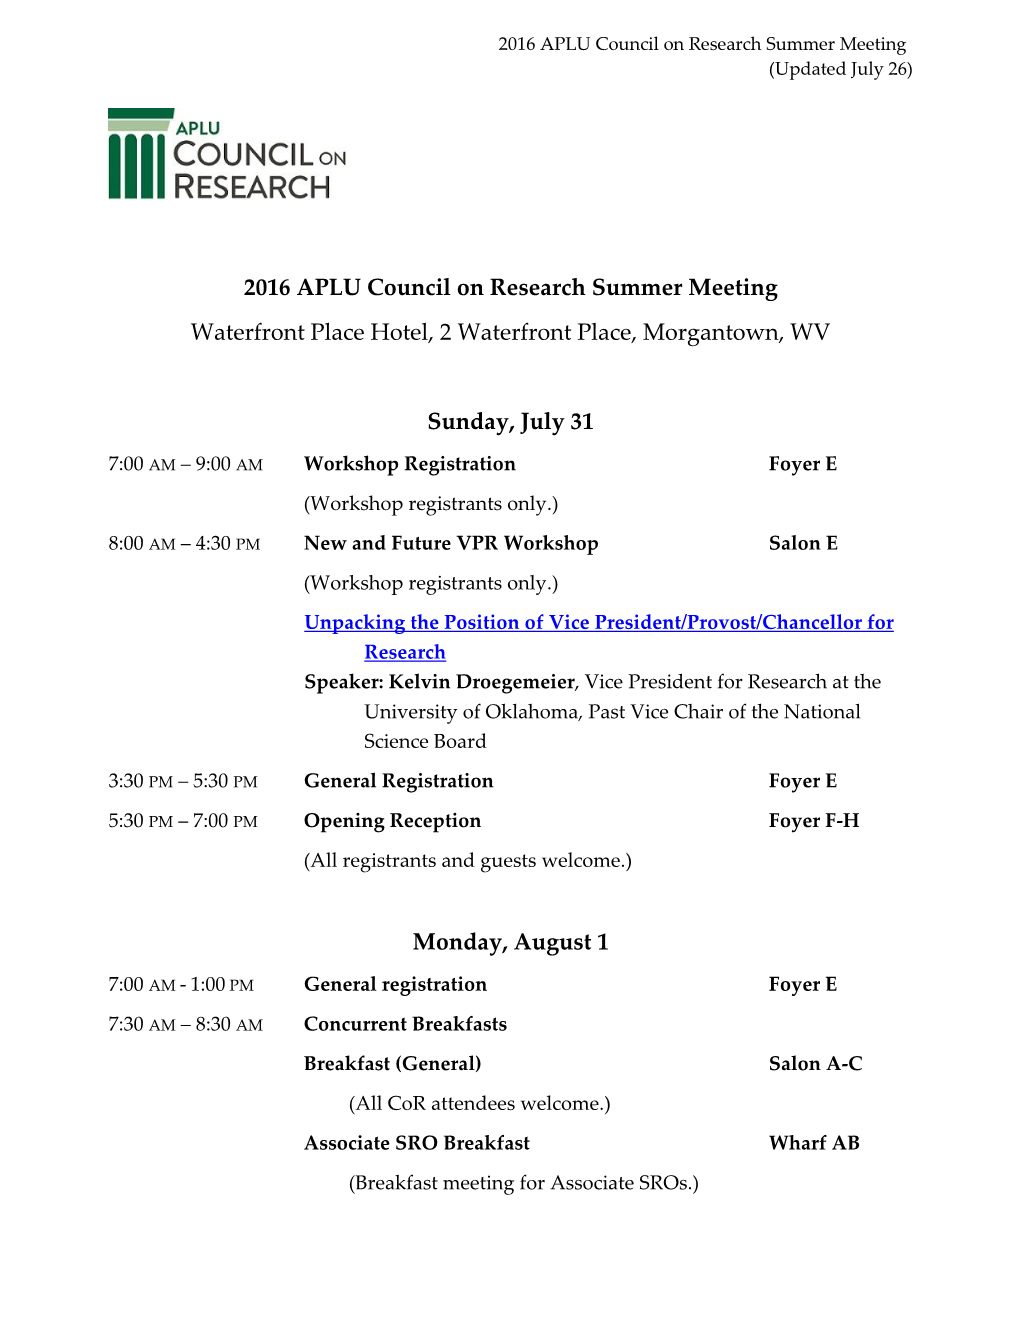 2016 APLU Council on Research Summer Meeting Waterfront Place Hotel, 2 Waterfront Place, Morgantown, WV Sunday, July 31 Monday